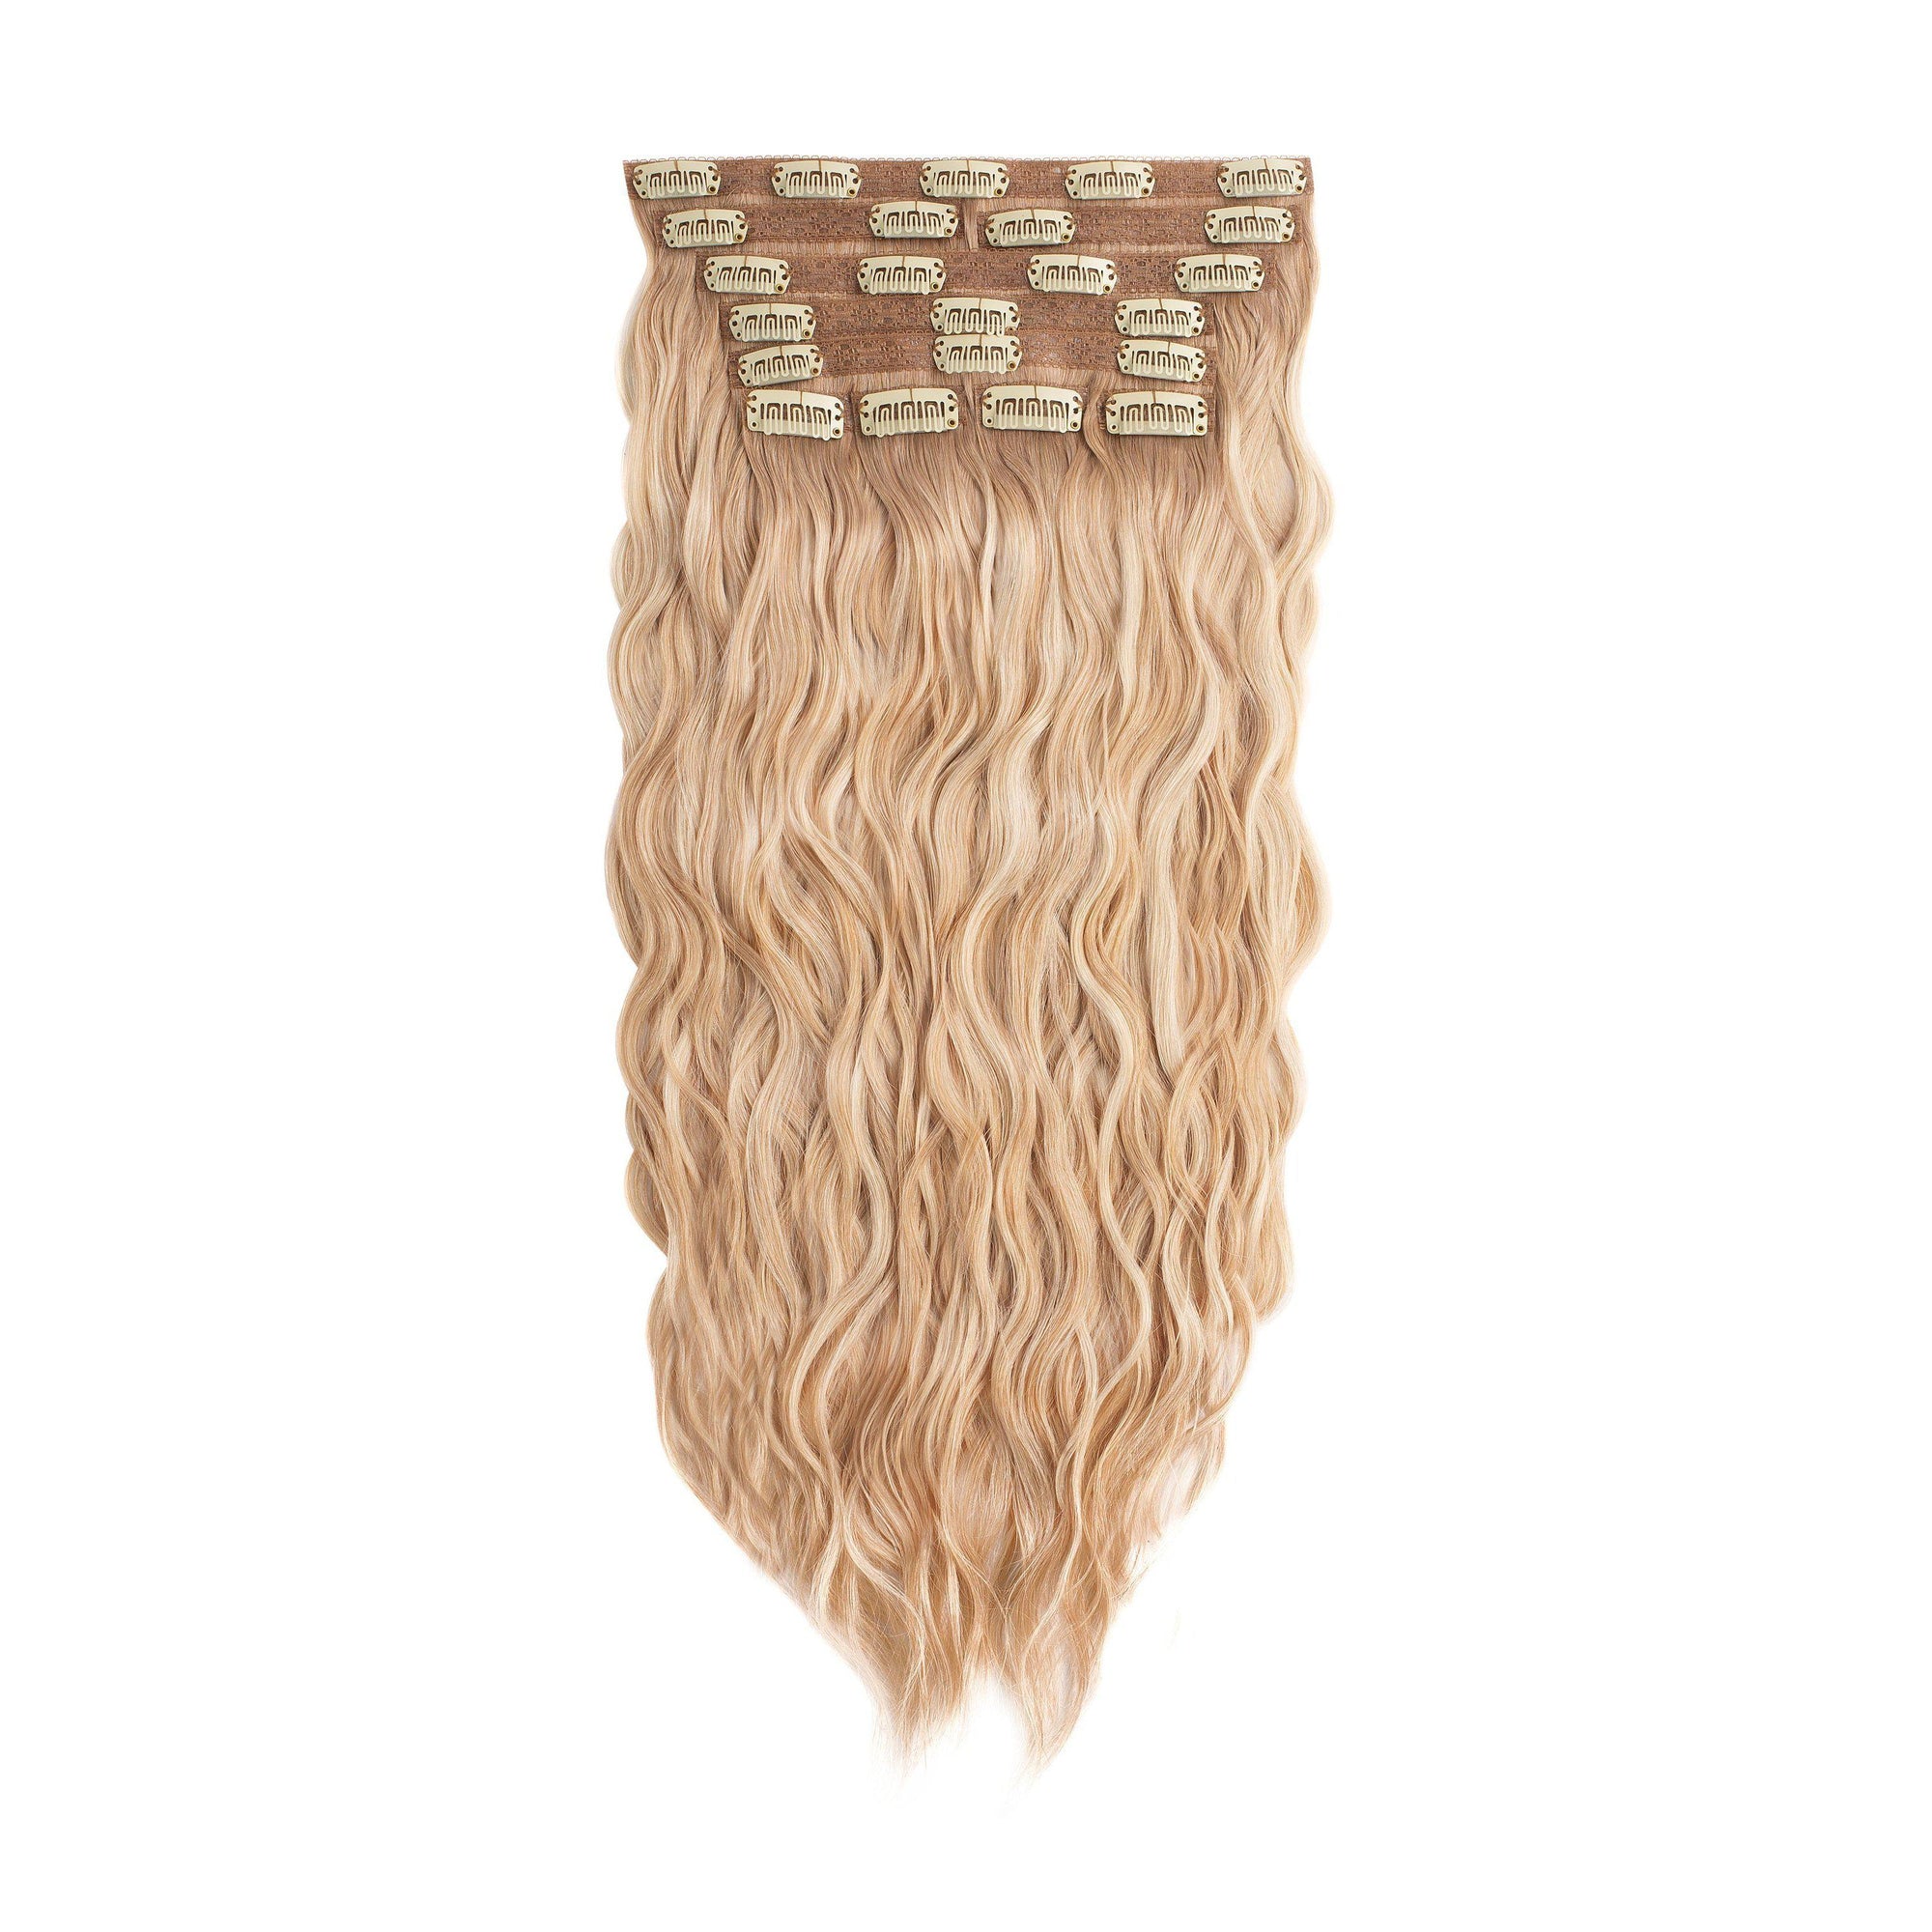 Glam Seamless Beach Wave Invisi Clip Rooted Highlights - RH23/613